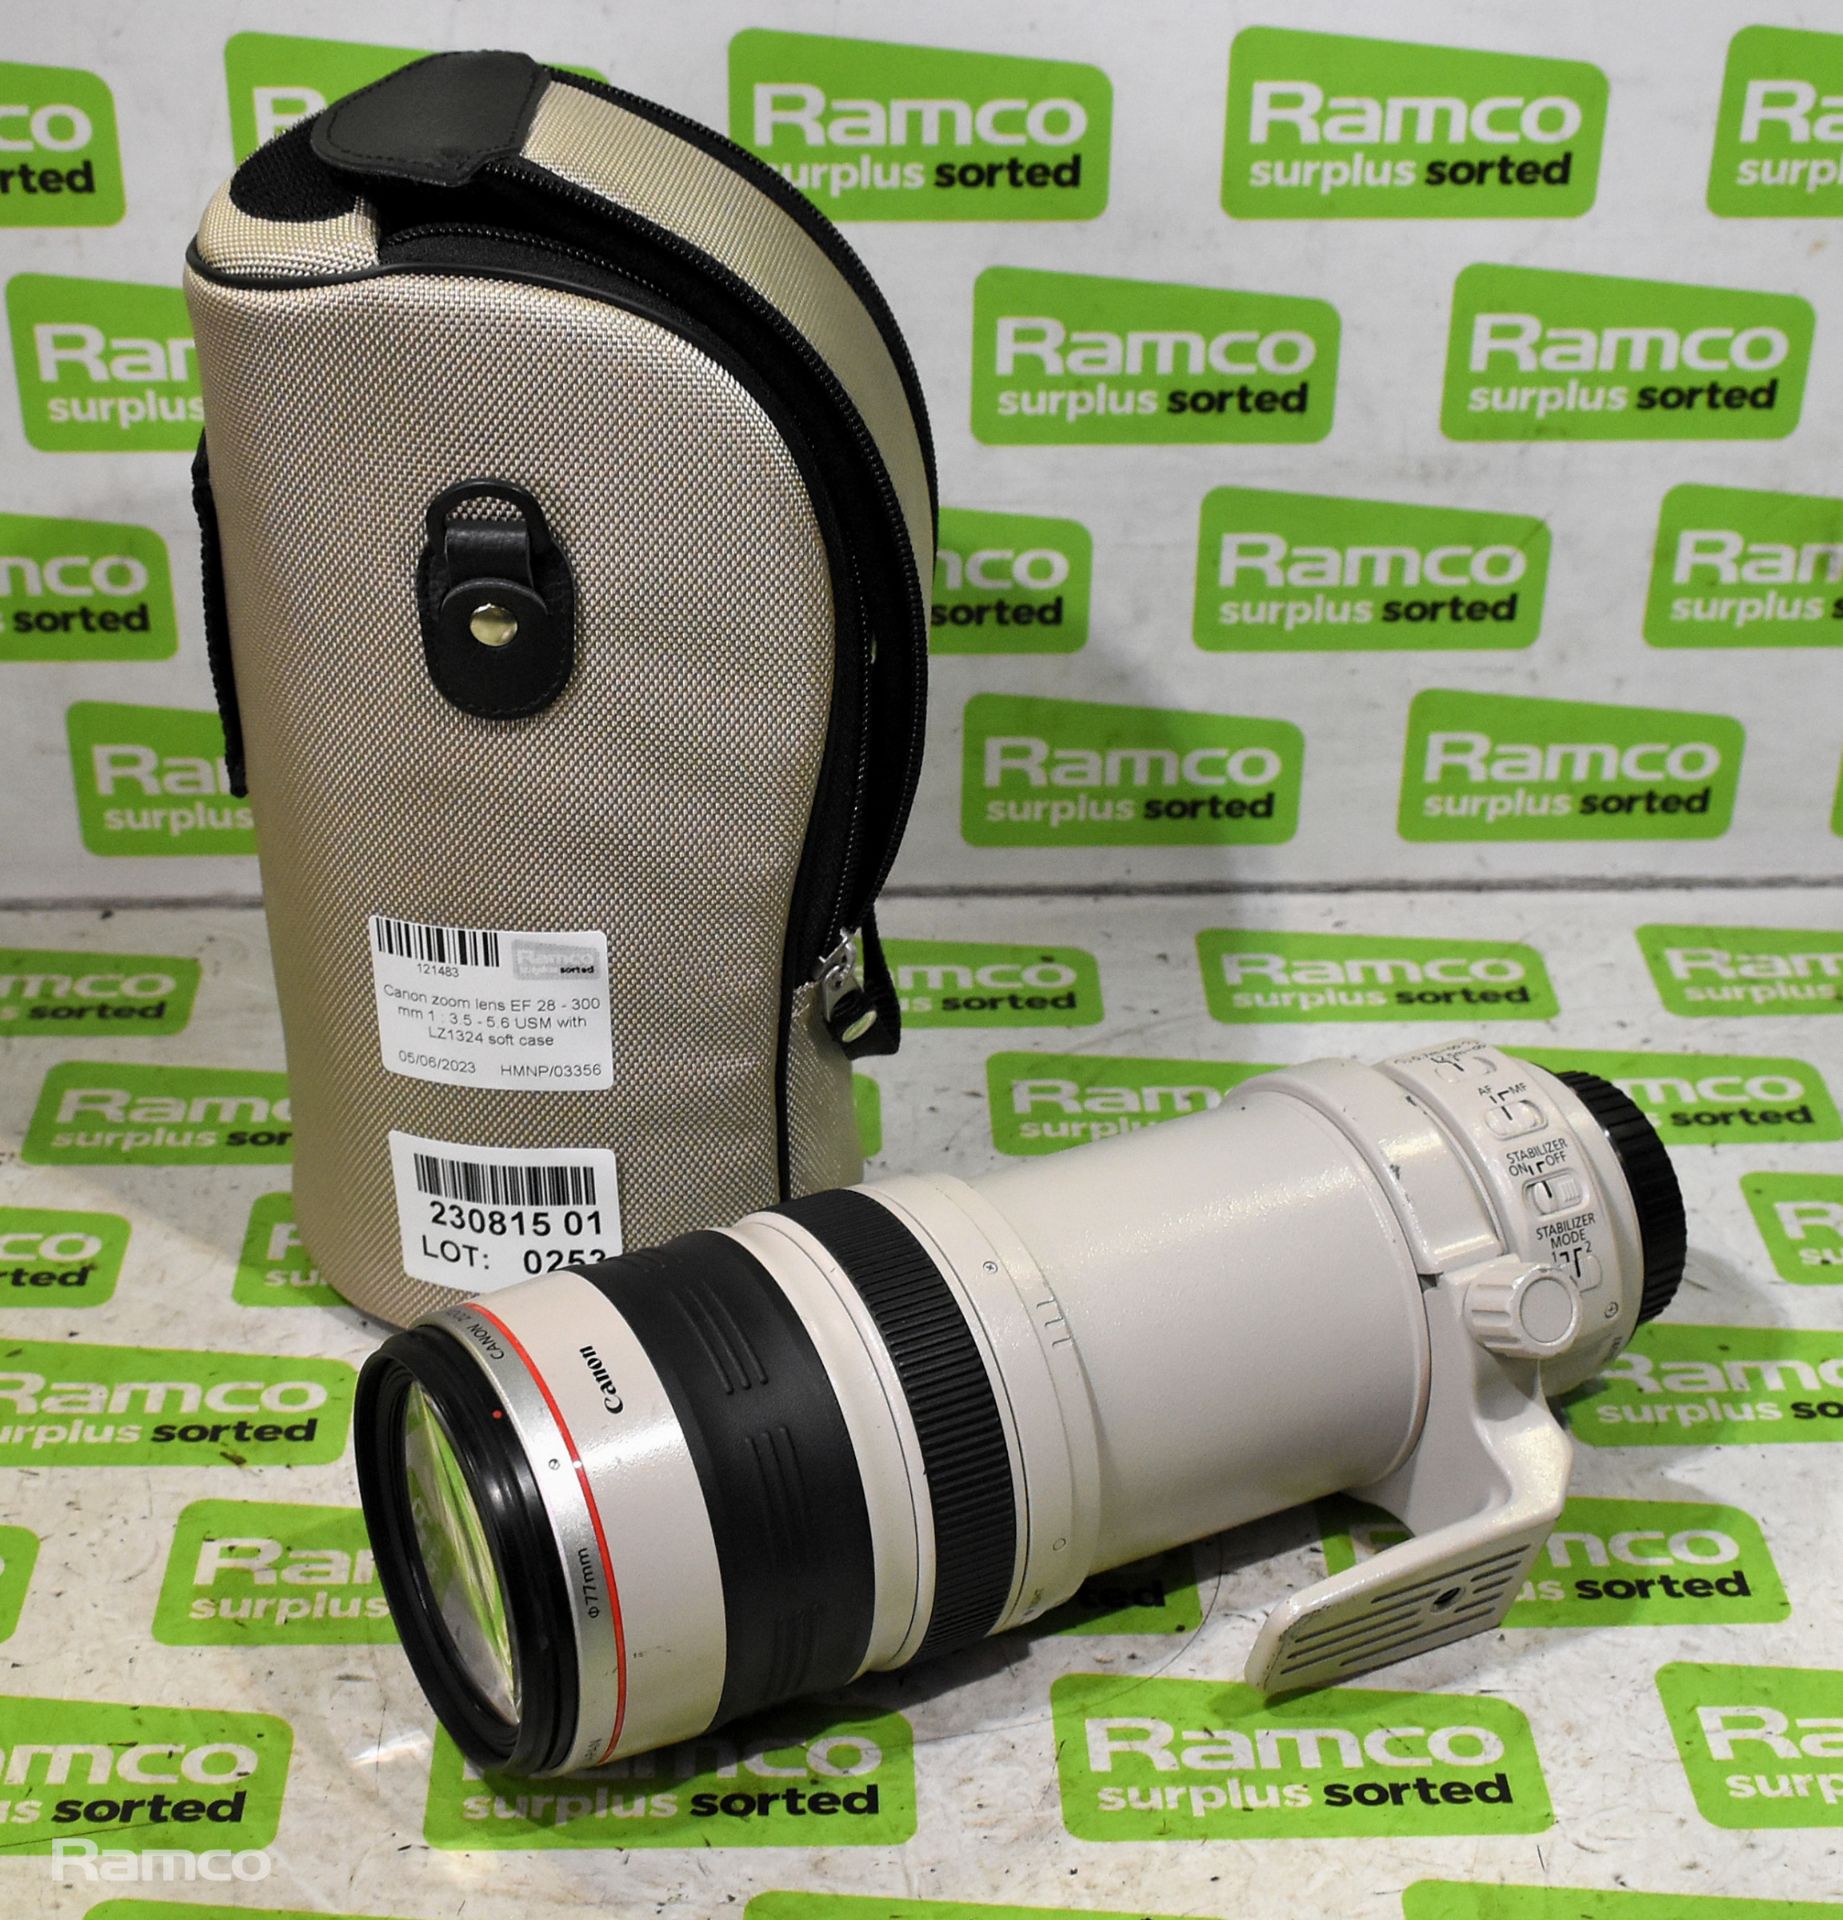 Canon zoom lens EF 28 - 300 mm 1 : 3.5 - 5.6 USM (no lens cover), Canon EW-83G with LZ1324 soft case